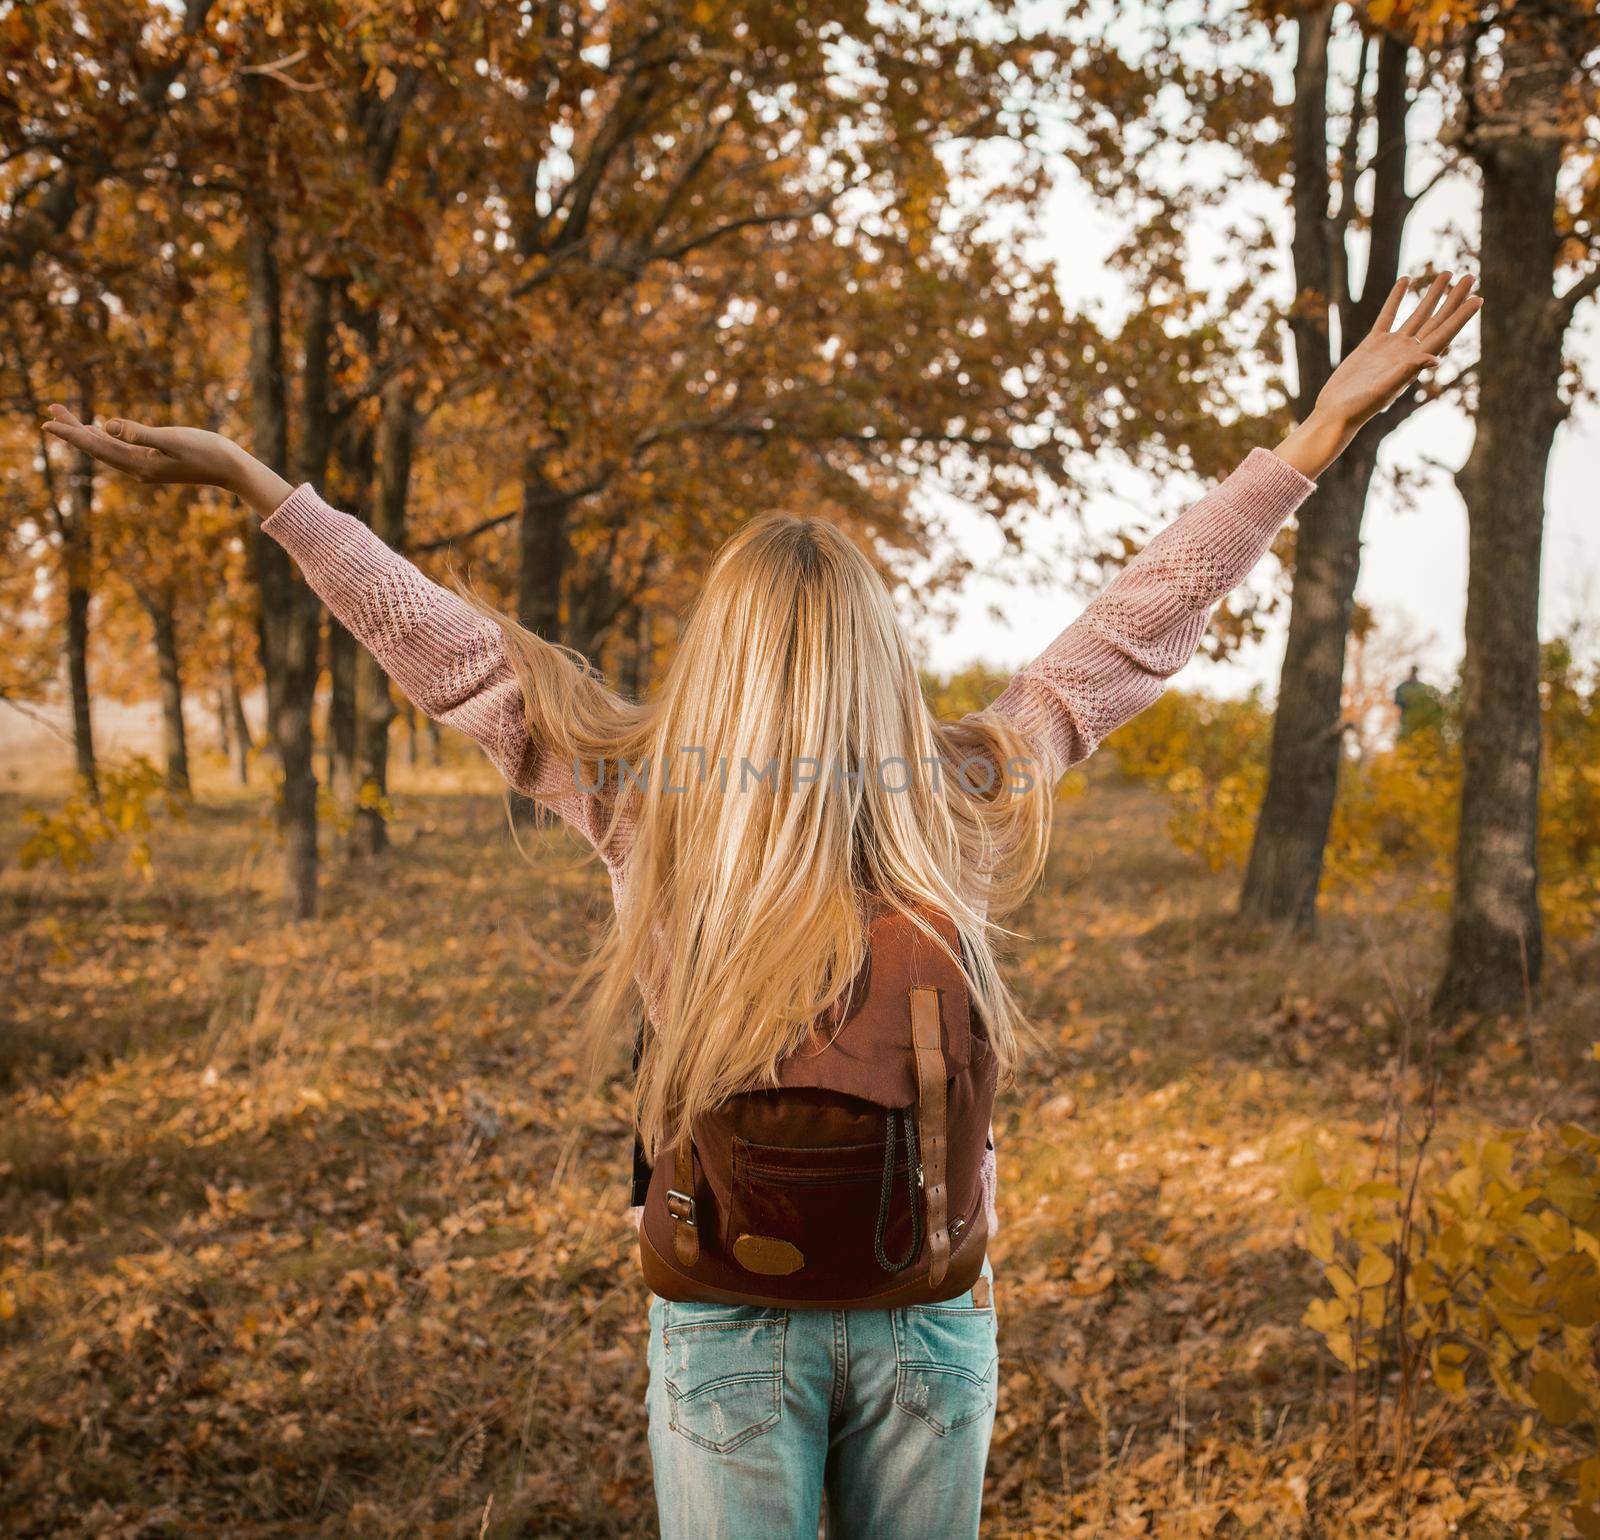 Happy Woman With A Backpack Stands Against The Backdrop Of The Autumn Forest, Raising Her Arms To Sides, Rear View Of Young Caucasian Blonde With Long Hair Wearing Jeans Standing In Nature In Sunlight